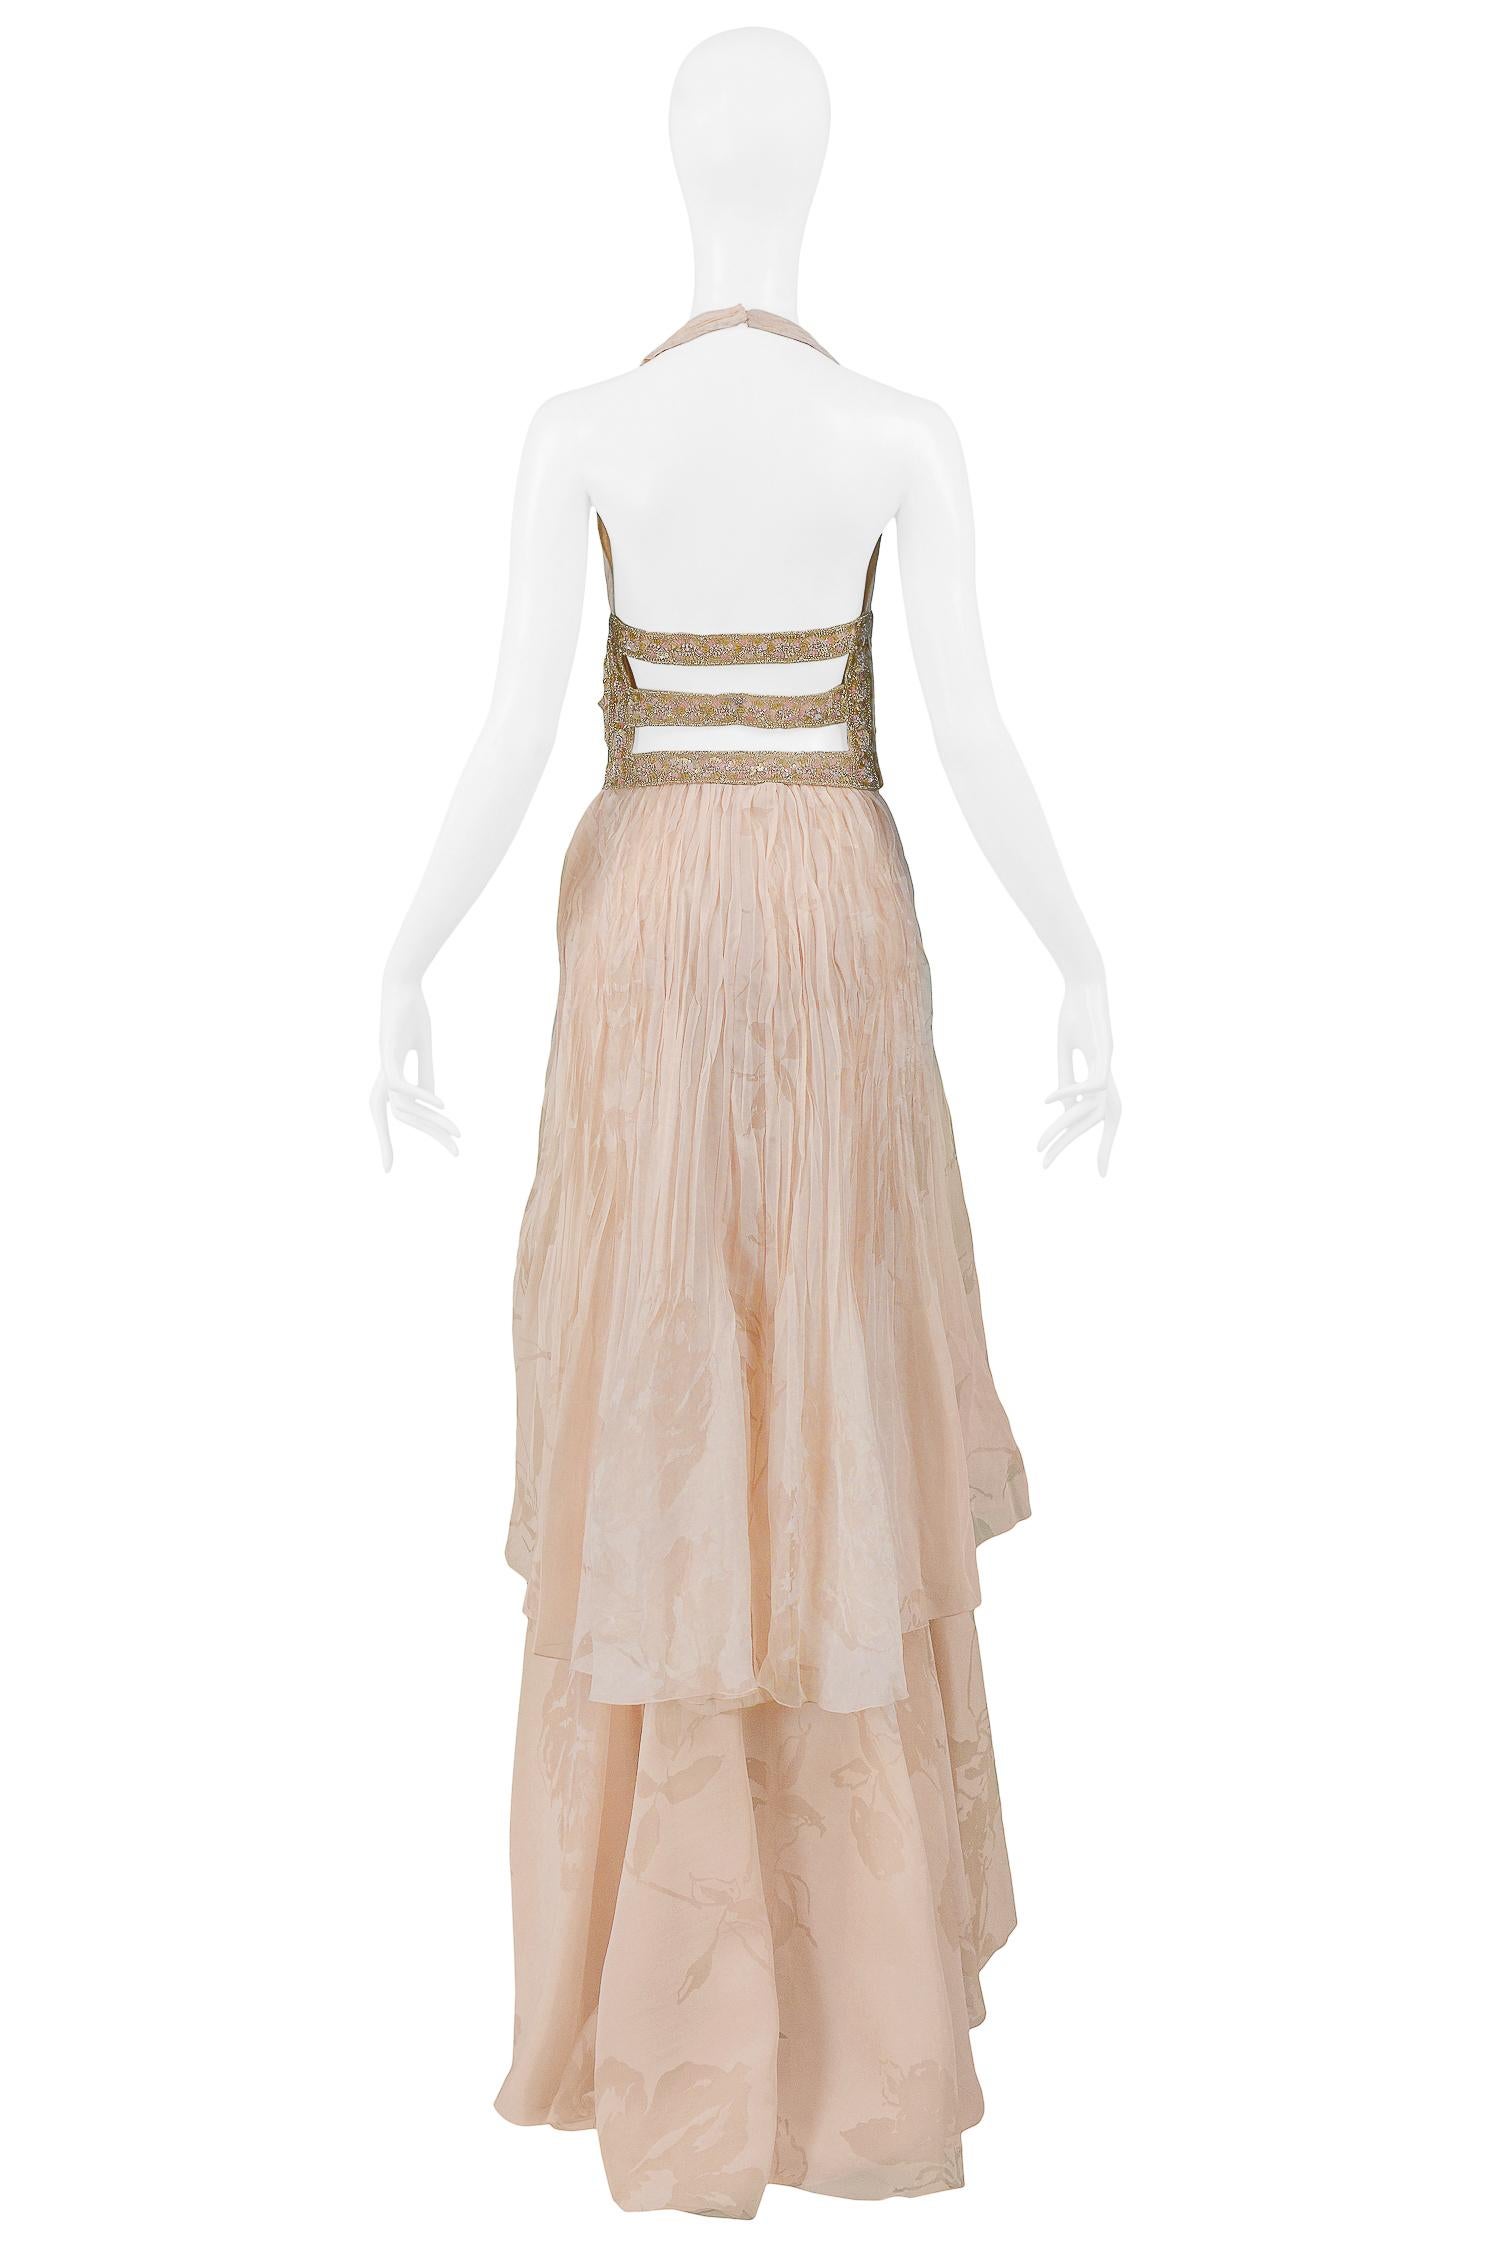 Valentino Peach Floral Silk Runway Evening Gown with Beaded Belt 2007 1